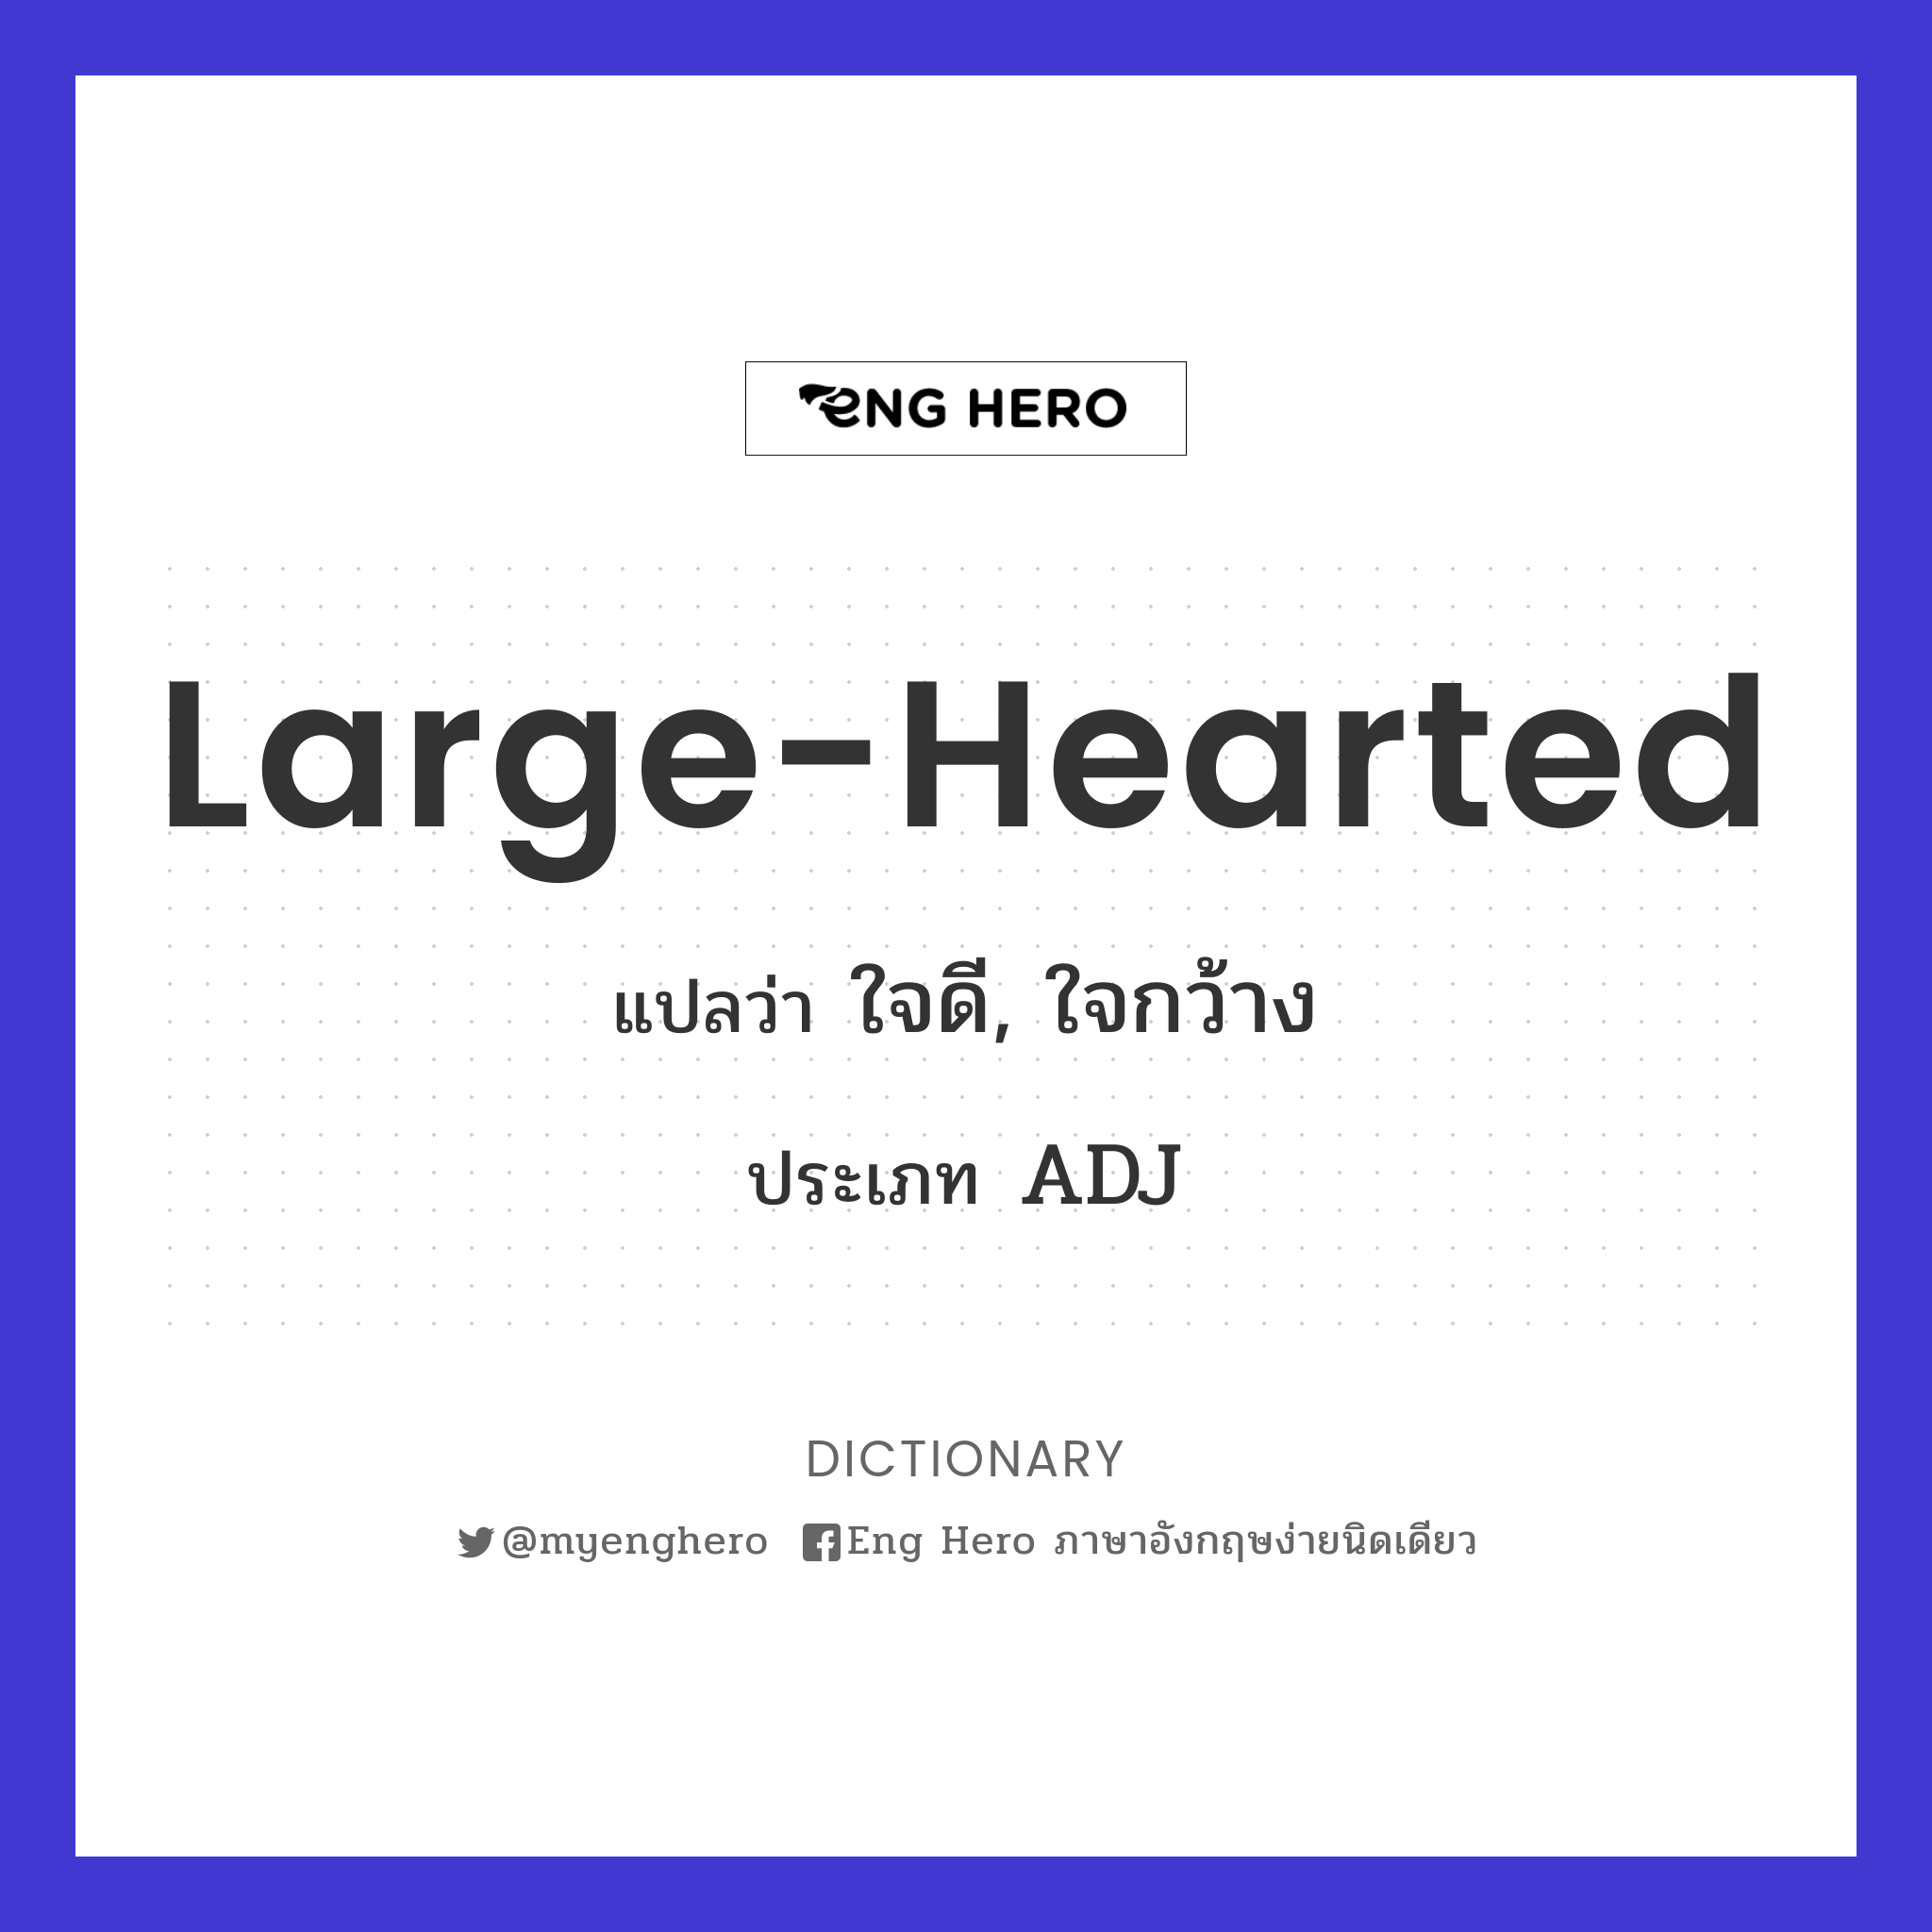 large-hearted